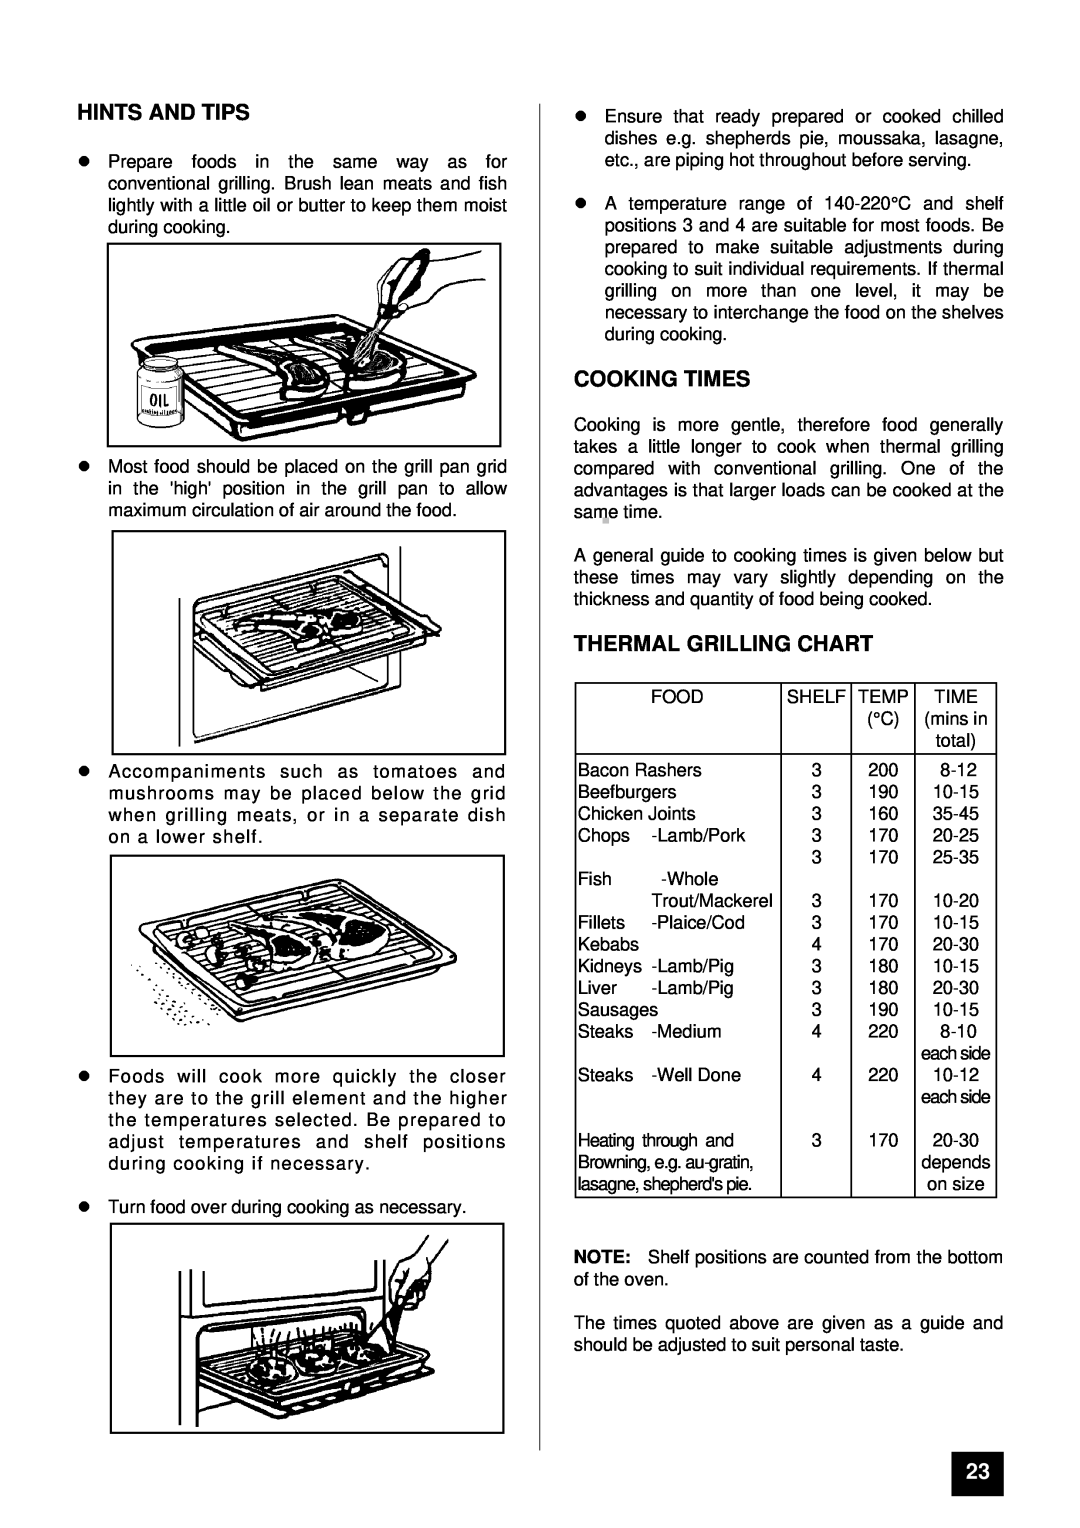 Tricity Bendix BS 600 installation instructions Cooking Times, Thermal Grilling Chart, lHINTS AND TIPS 